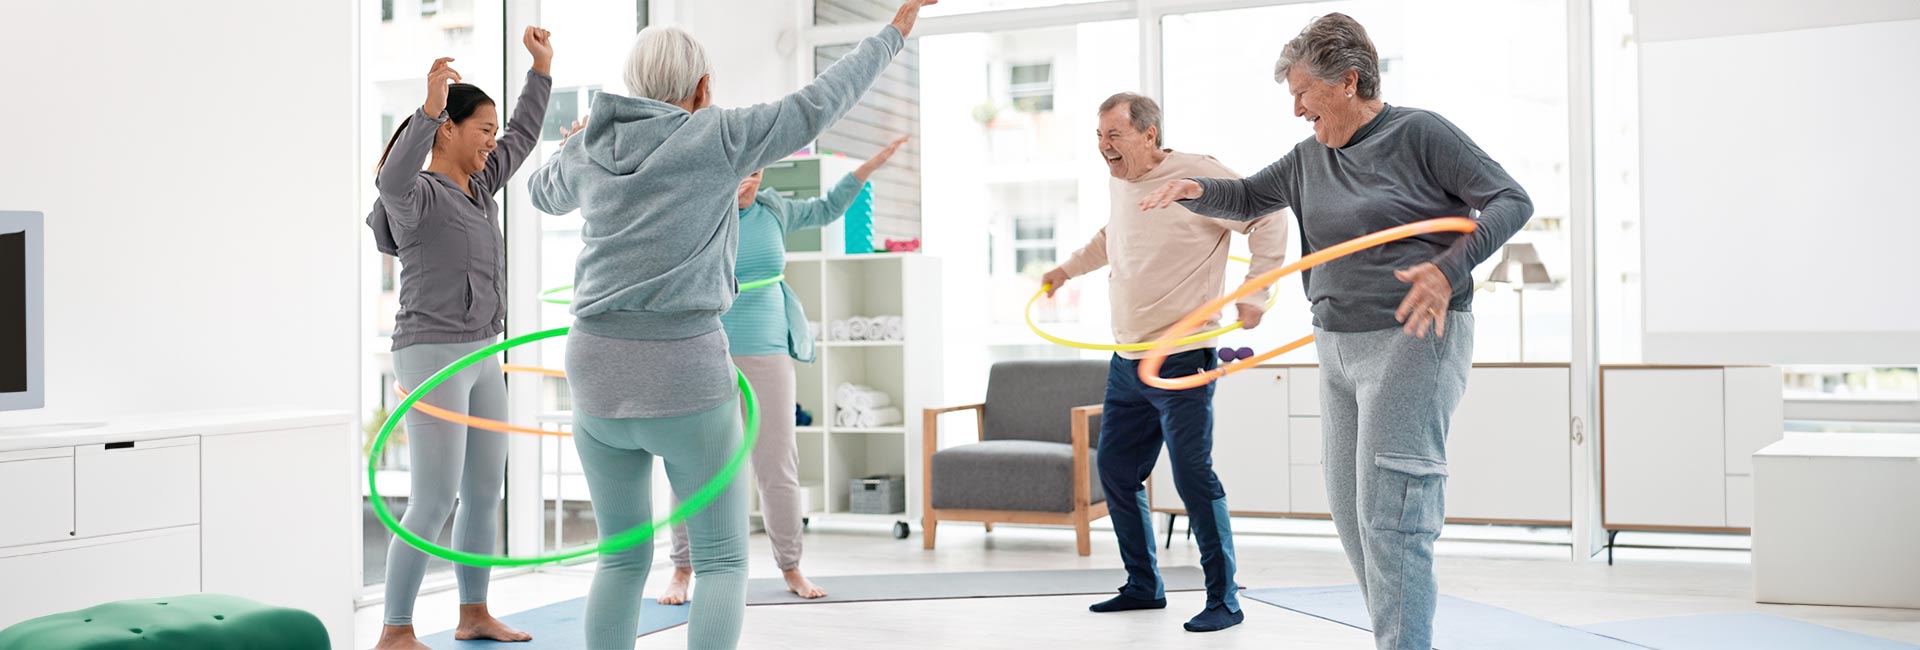 A group of older adults have fun hula hooping for exercise